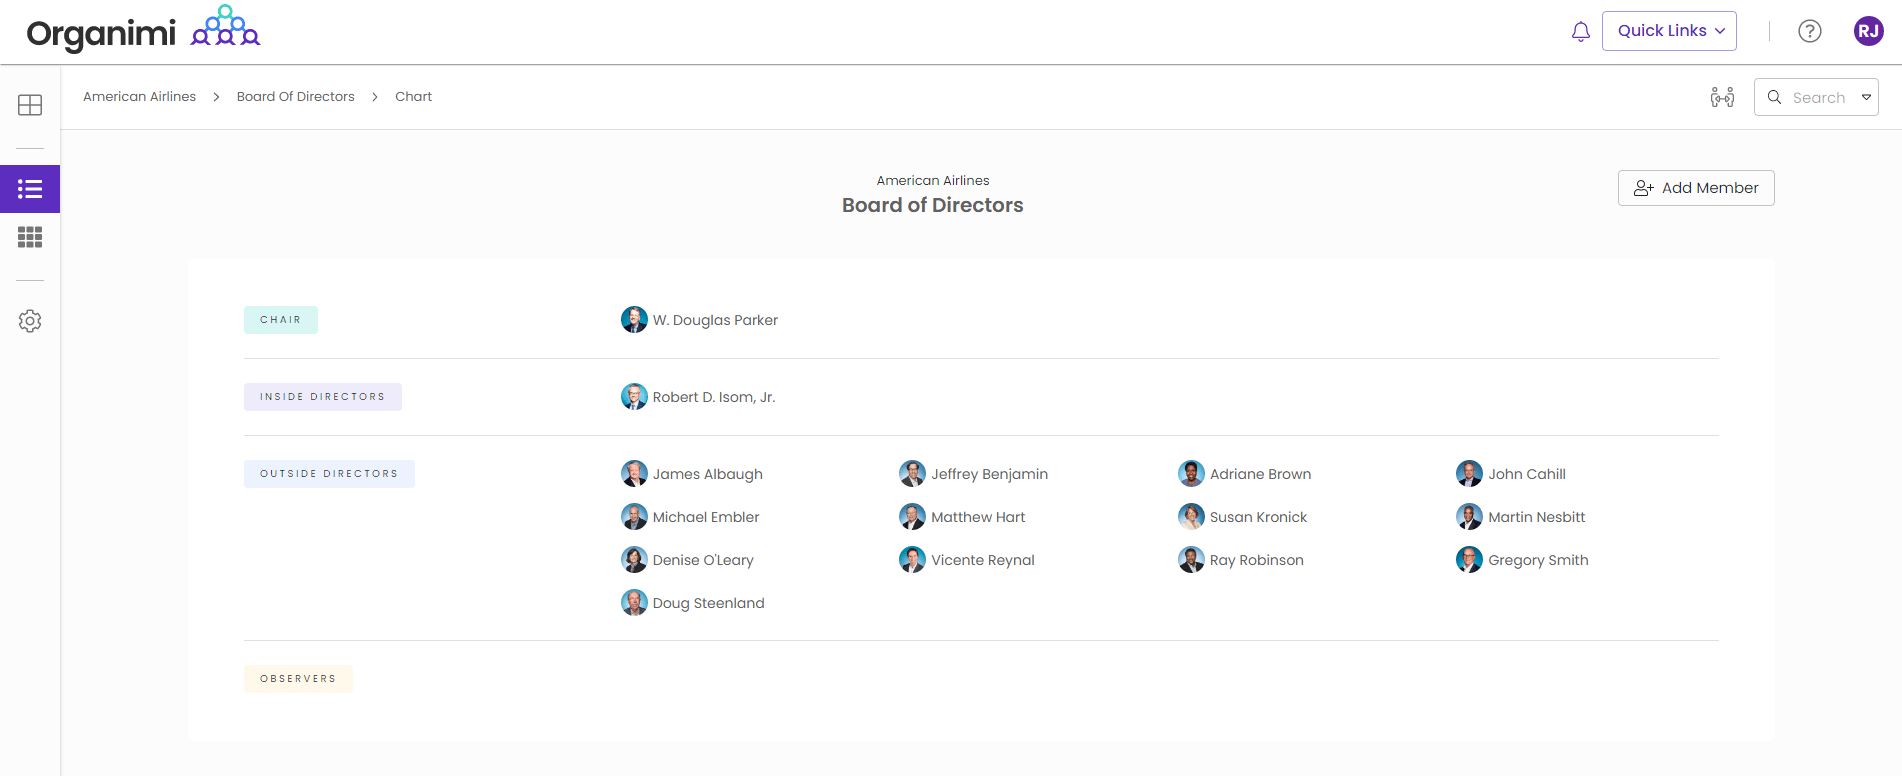 American Airlines' Board of Directors Governance Chart